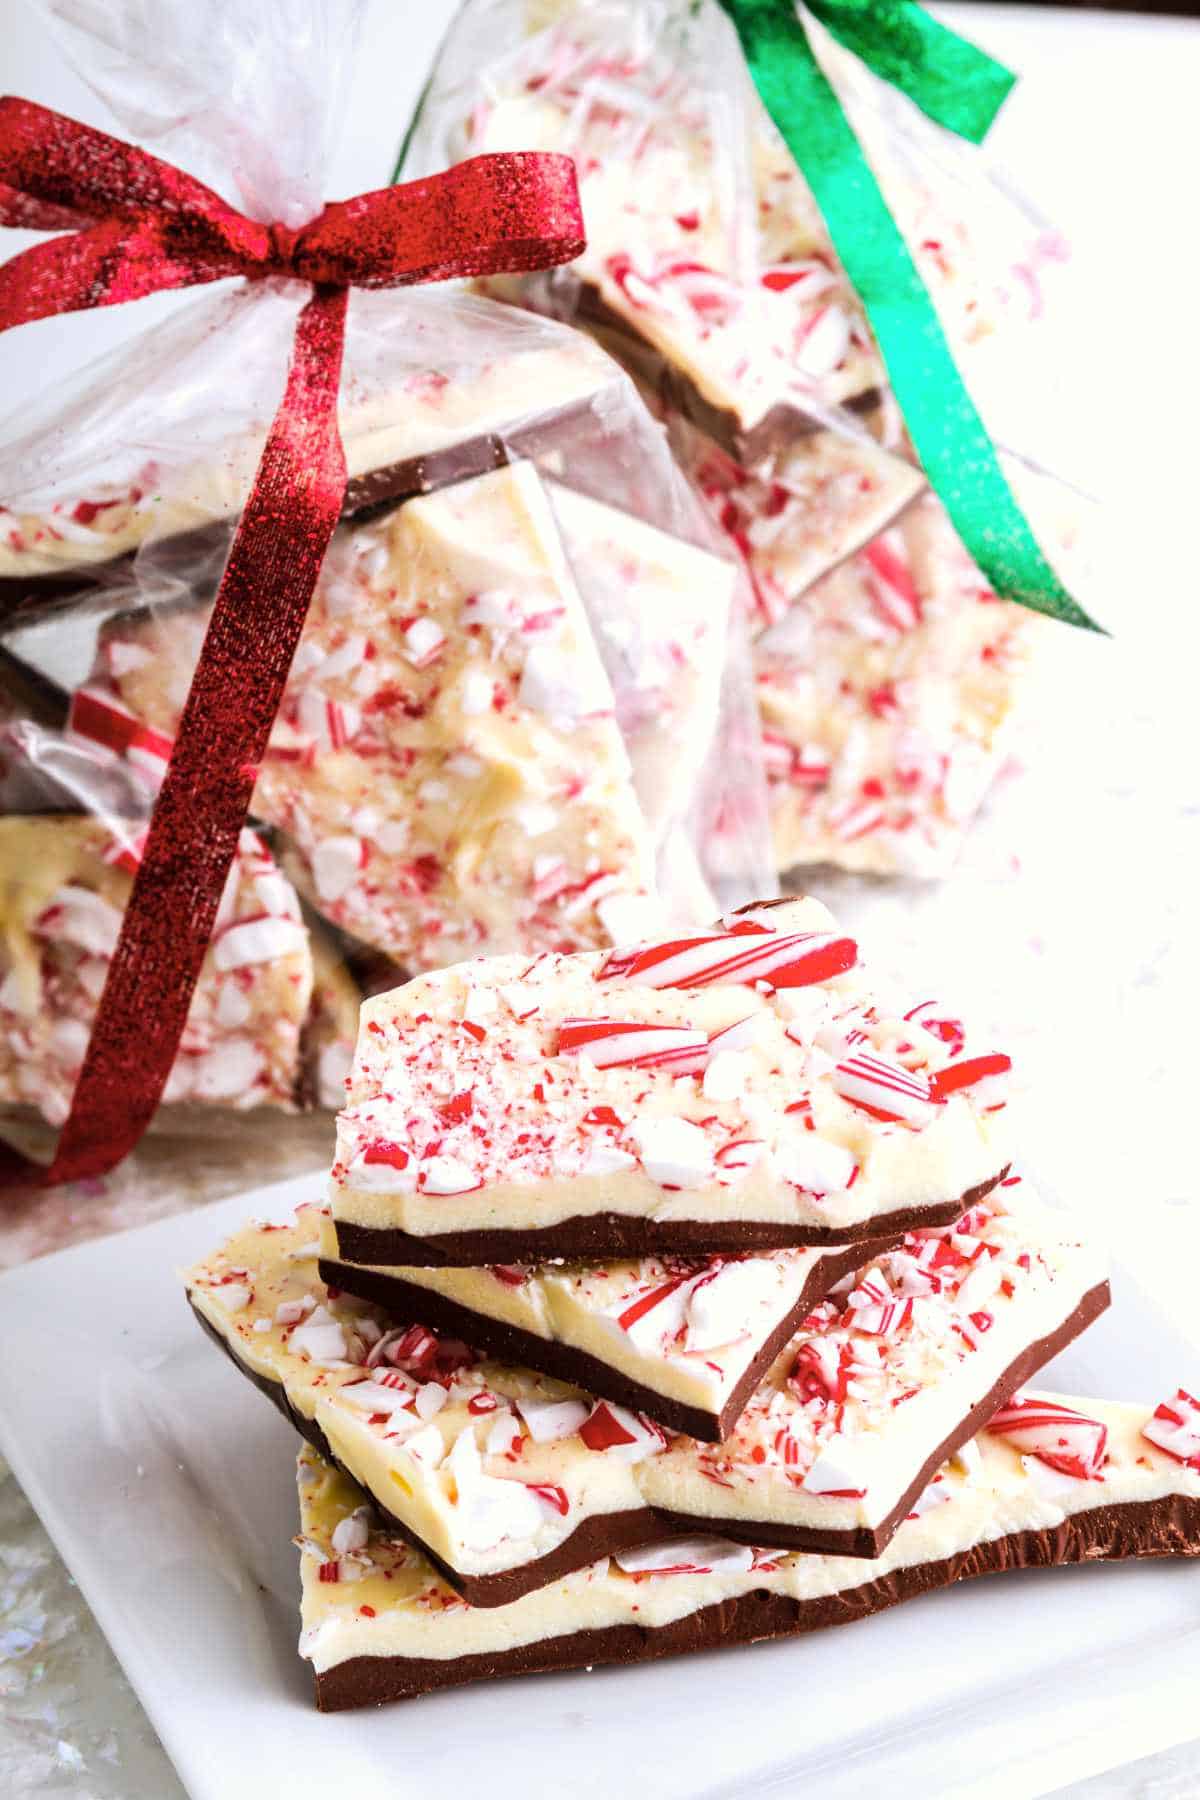 Holiday gift packages filled with chocolate peppermint bark candy.